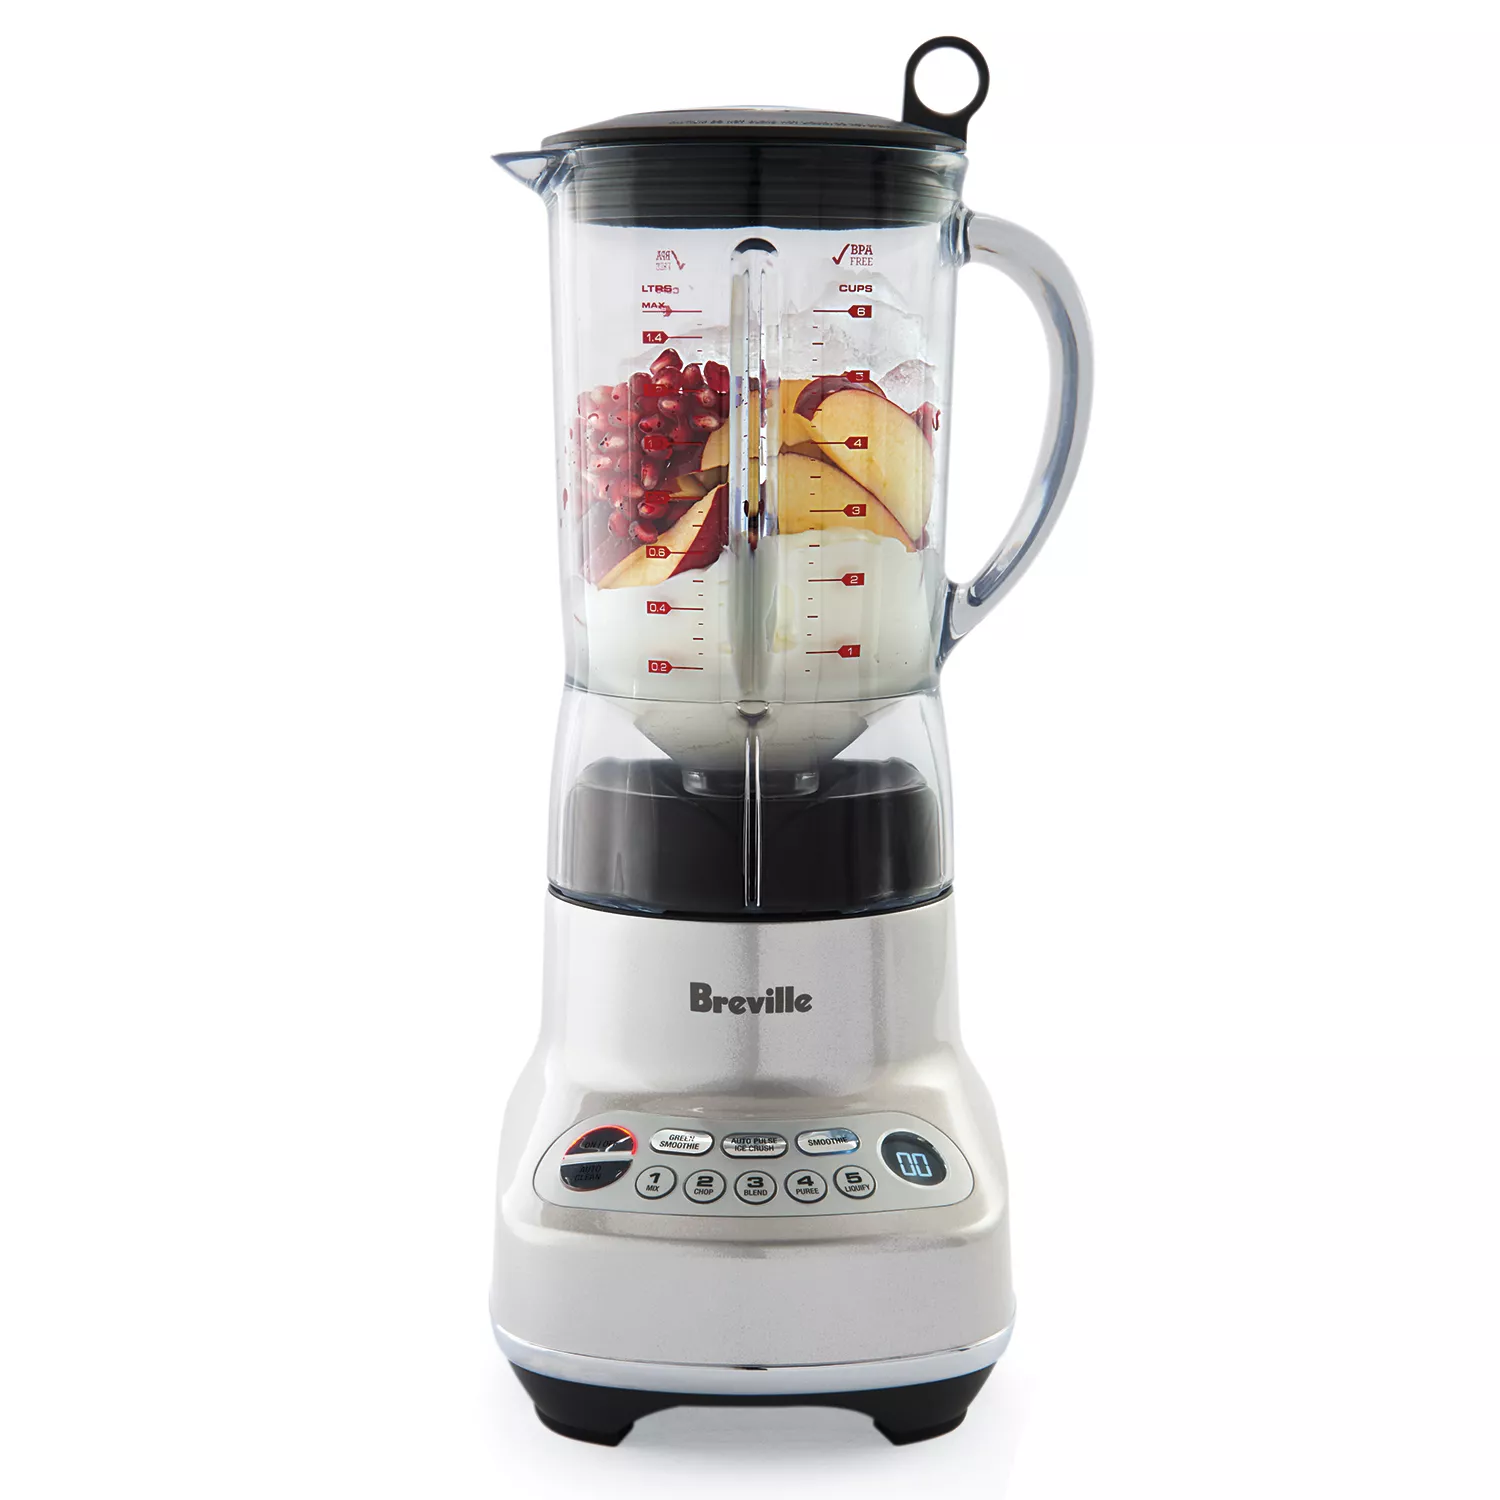 Breville Hemisphere Control Blender review: This Breville's